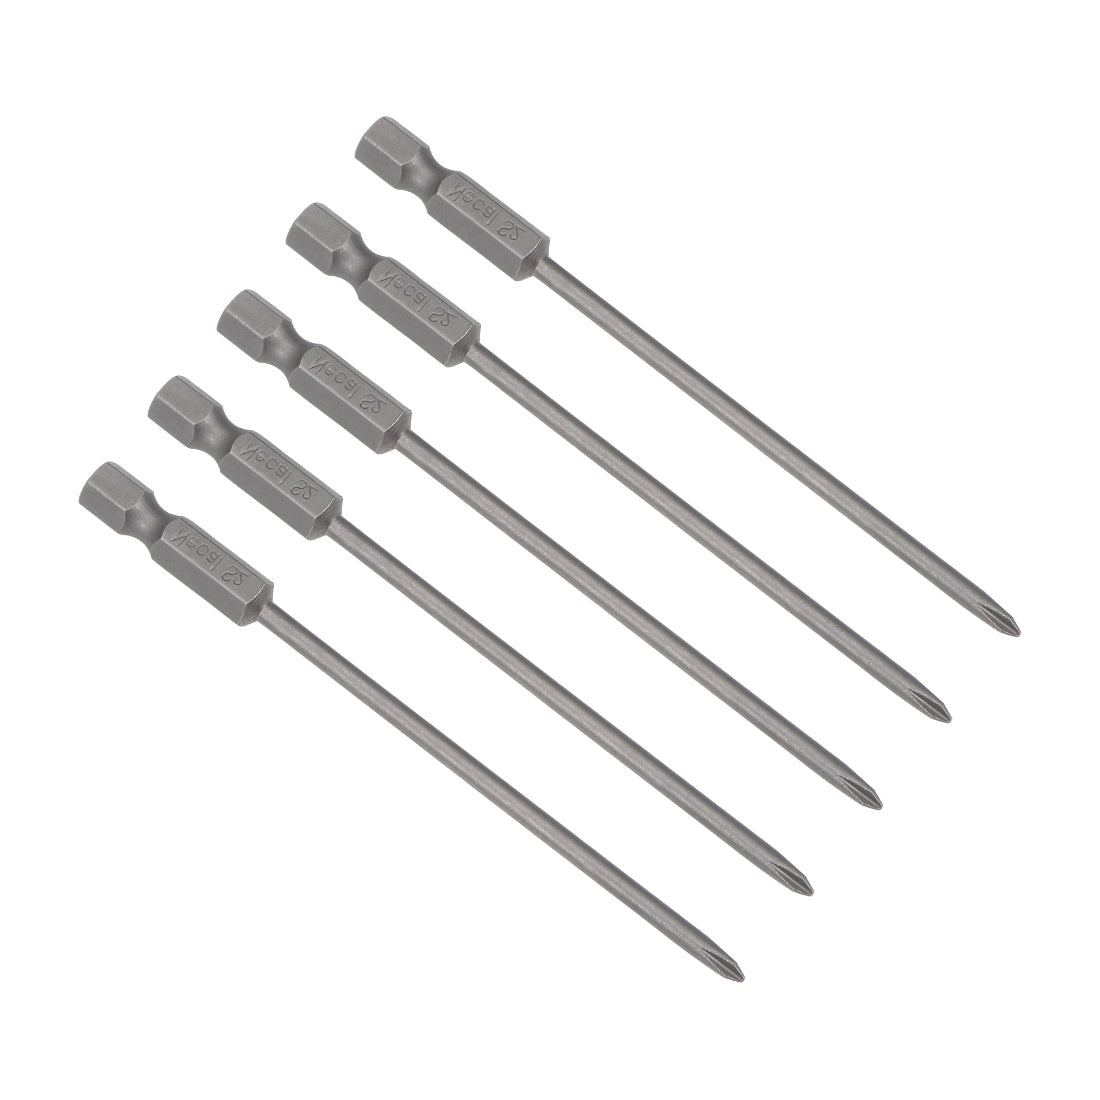 Uxcell Uxcell Phillips Bits 1/4-Inch Hex Shank 100mm Length Cross 3PH0 Magnetic Screw Driver S2 Screwdriver Bit 5Pcs